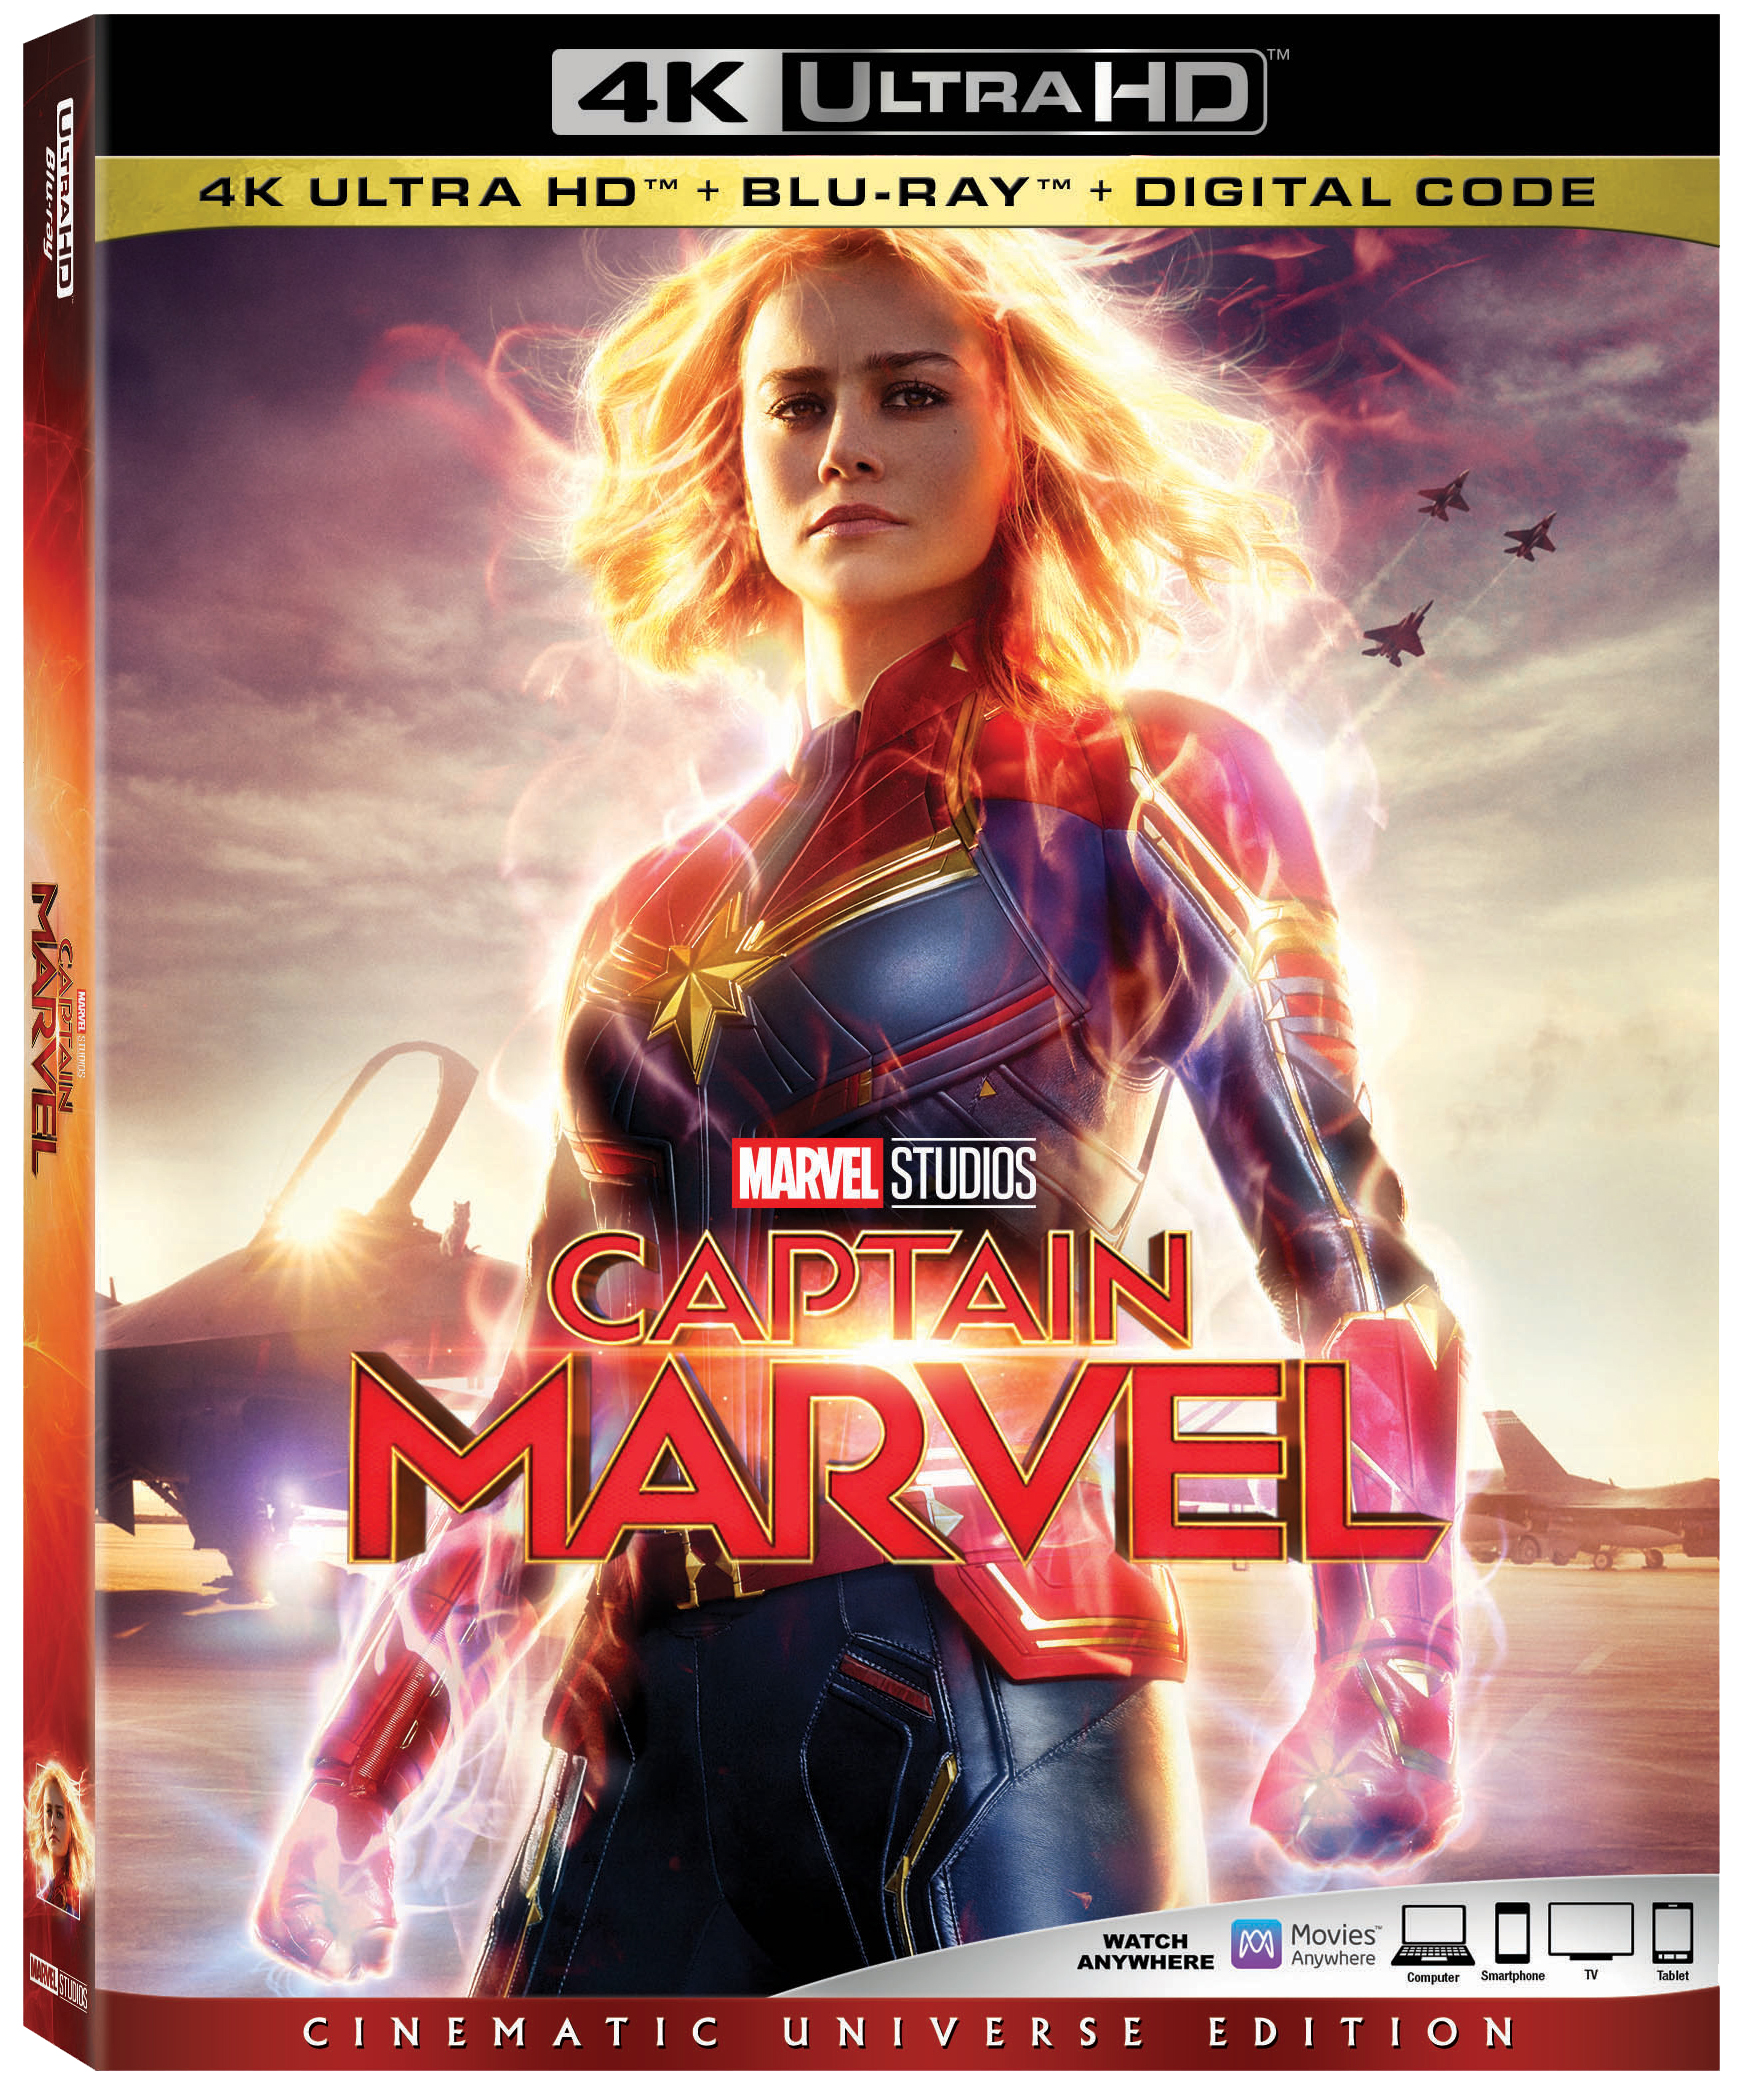 Captain Marvel at home